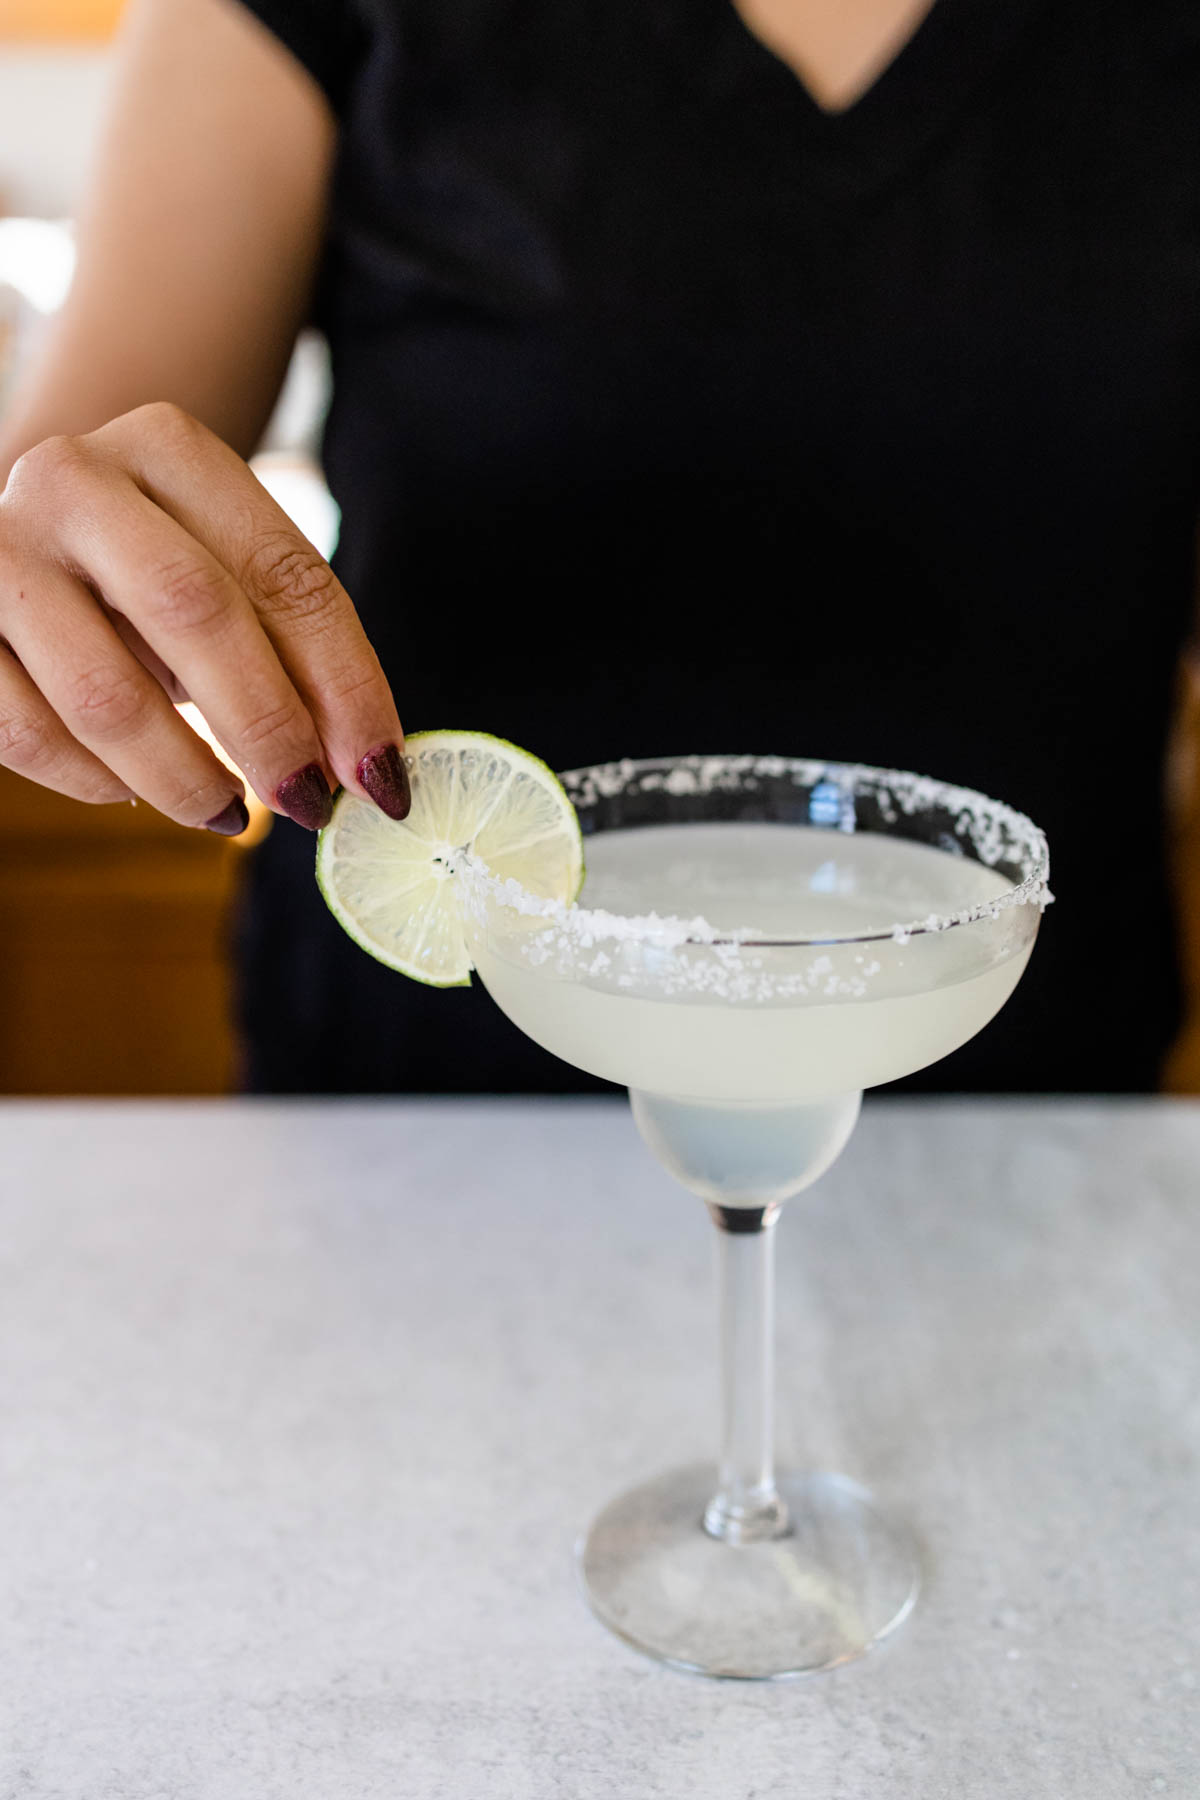 Woman adding a lime wheel to the side of a salt rimmed margarita glass.